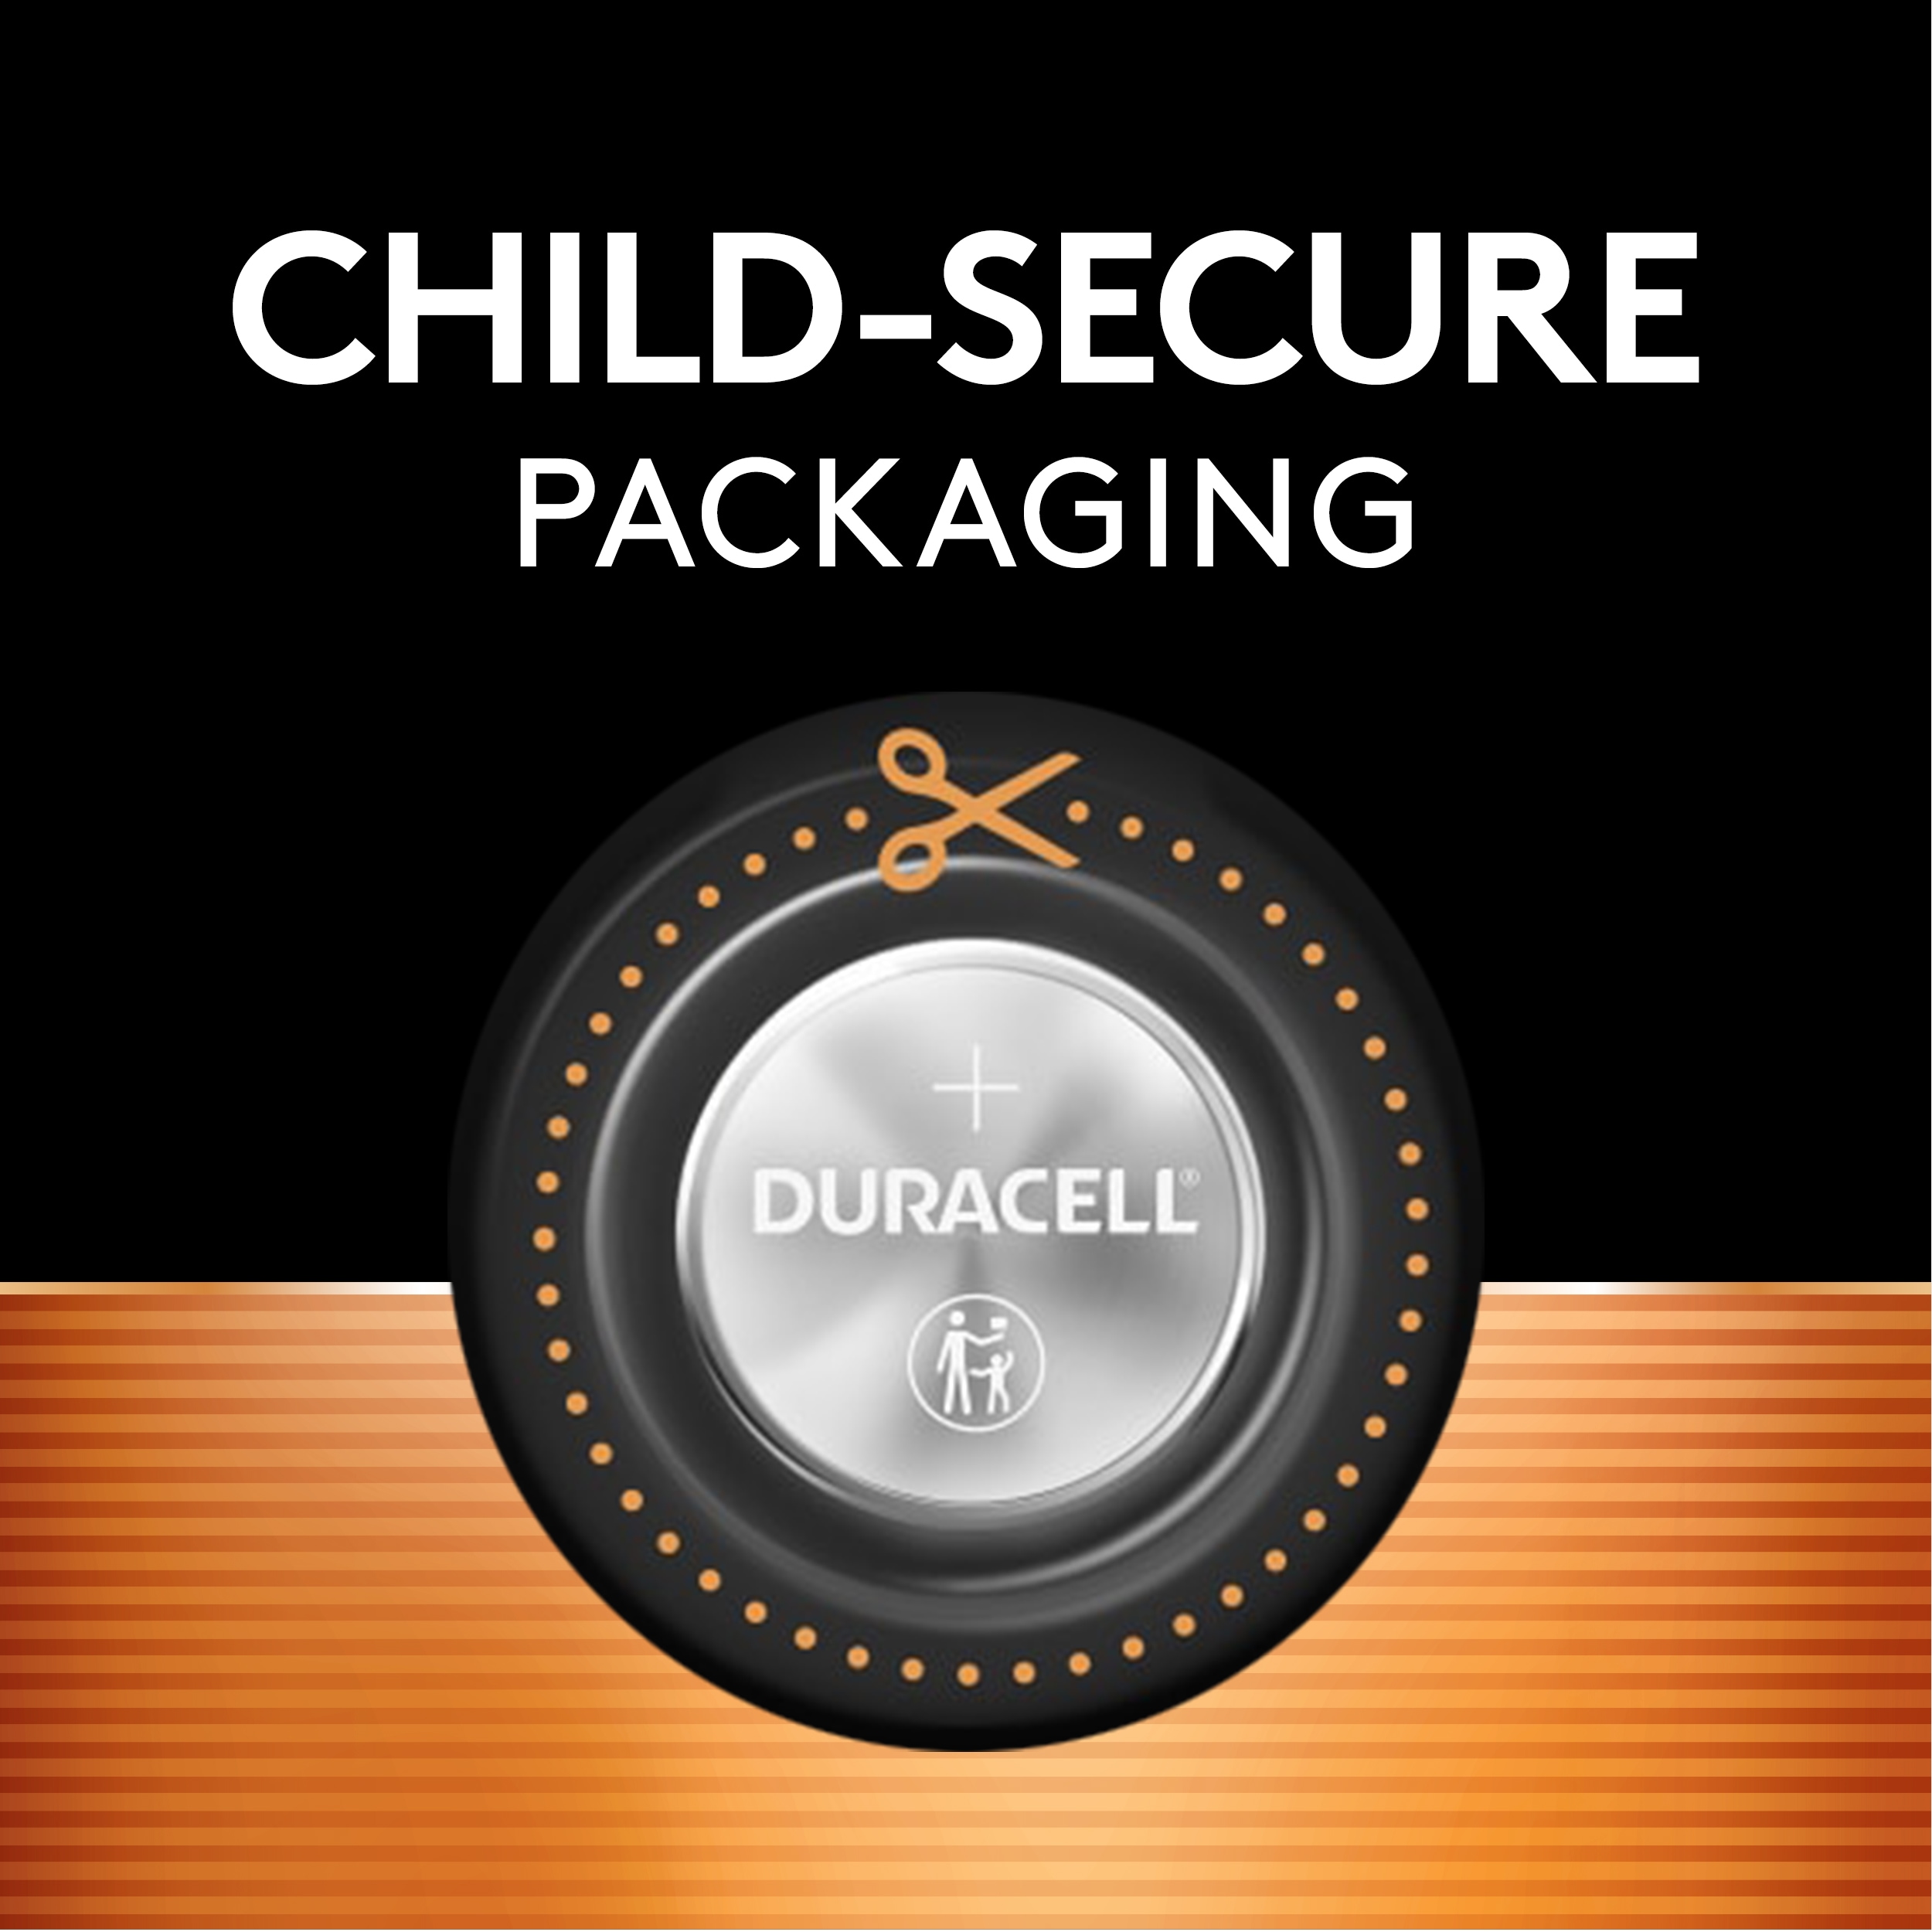 2025 Lithium Coin Batteries - Duracell Specialty Batteries